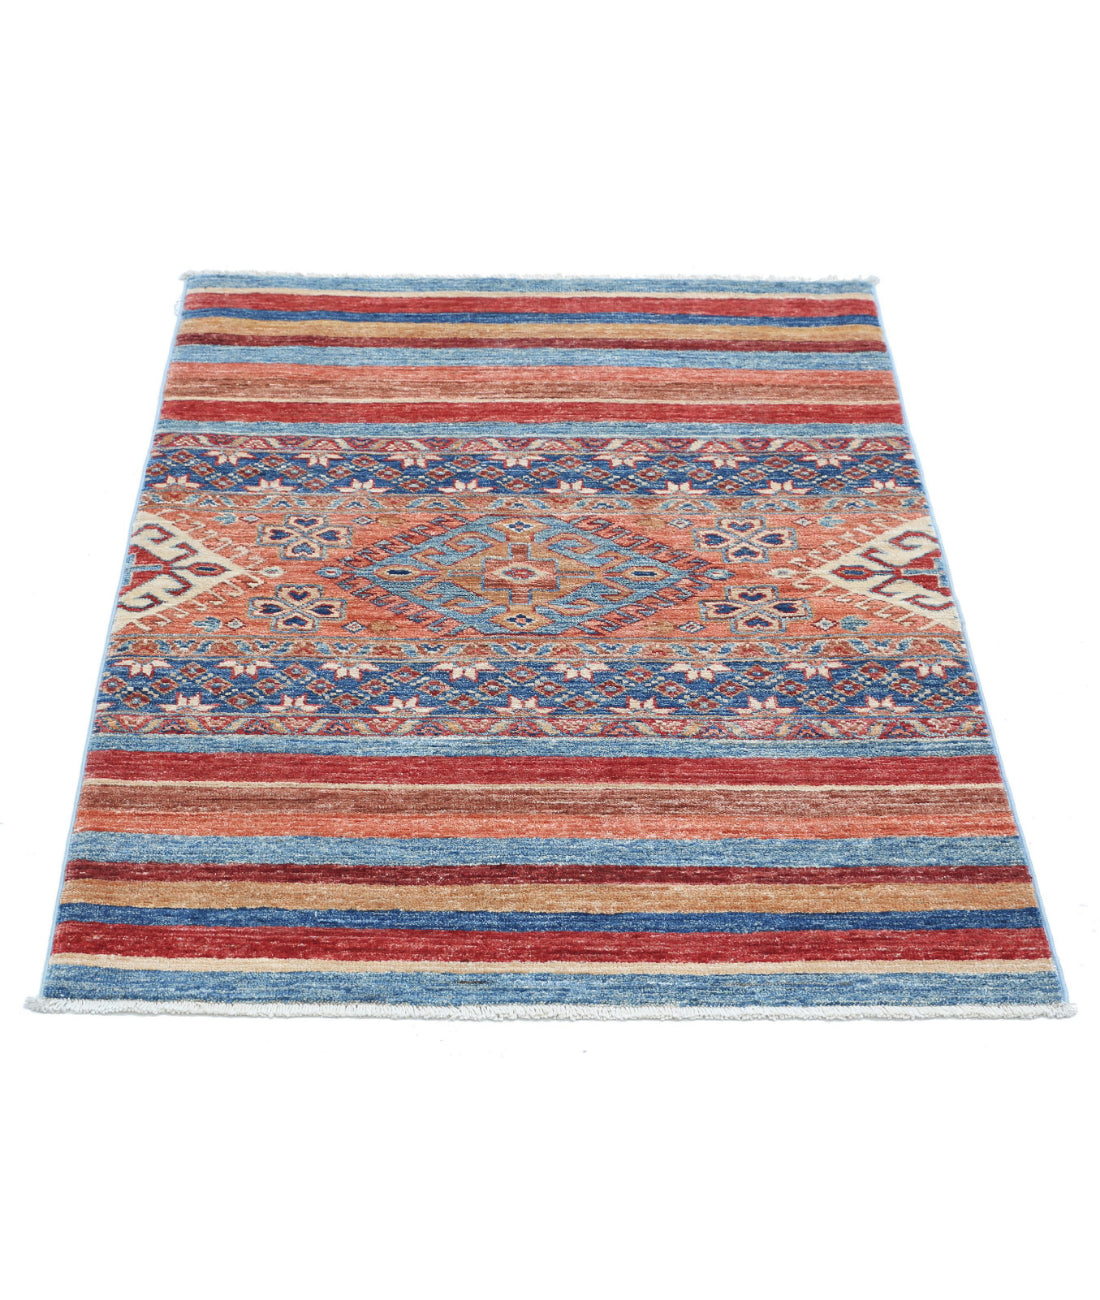 Hand Knotted Khurjeen Wool Rug - 2'9'' x 3'8'' 2'9'' x 3'8'' (83 X 110) / Multi / Multi